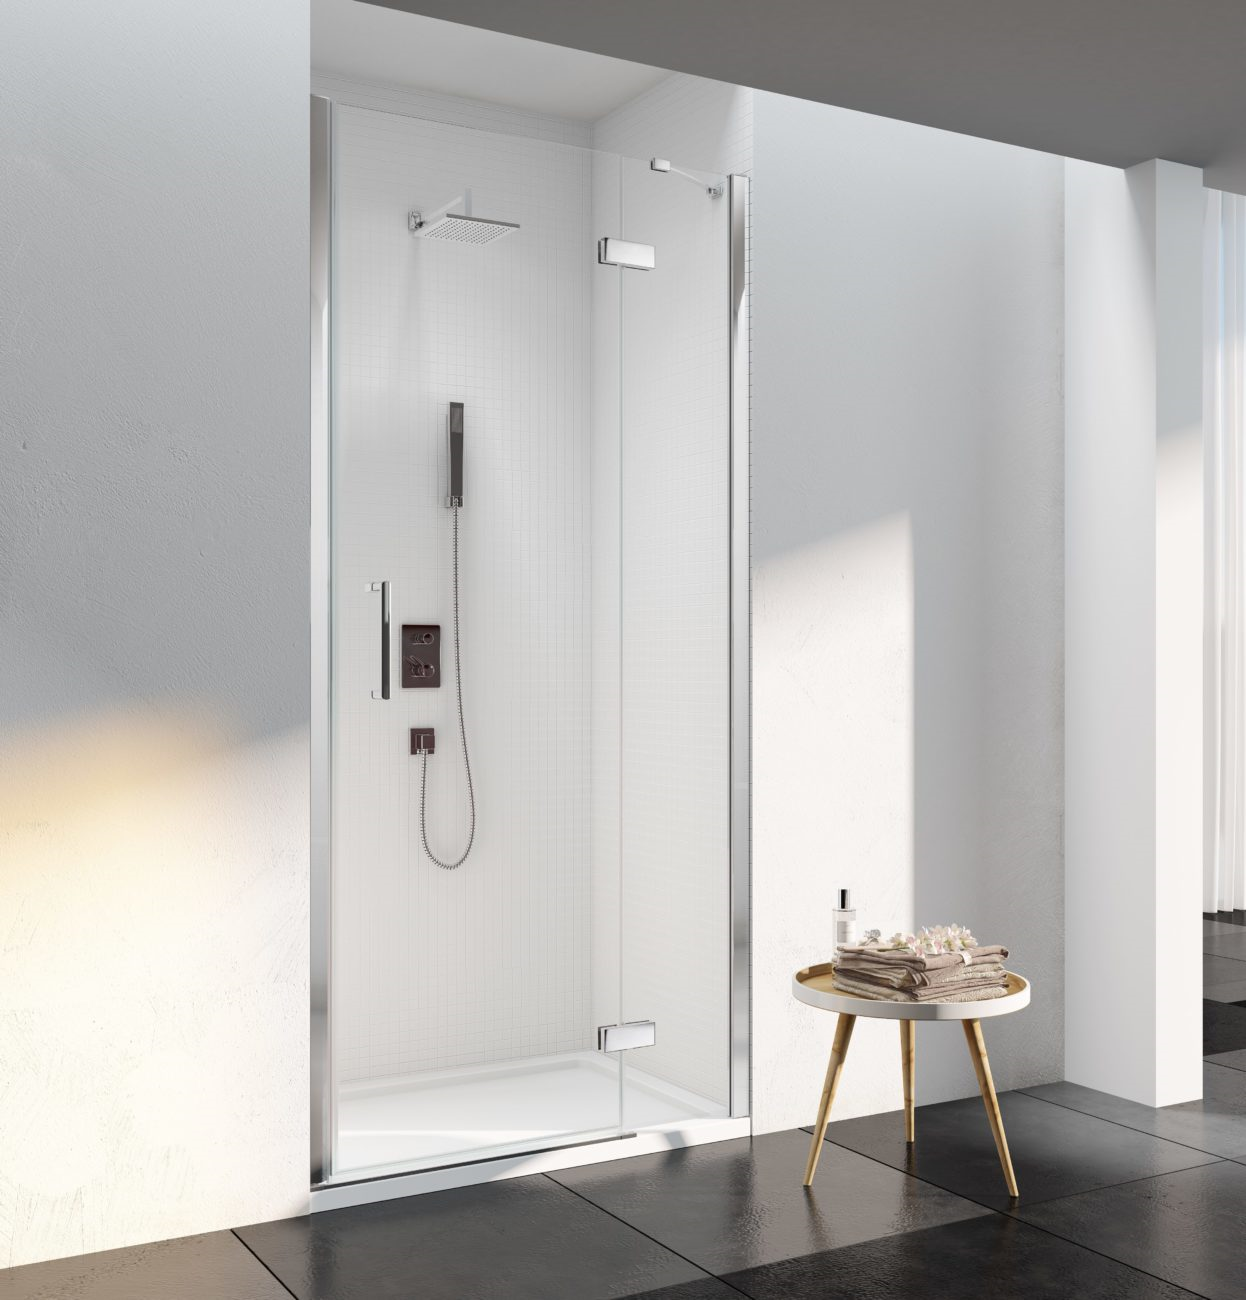 MERLYN S6FB1500RECH Series 6 Framless Hinged Shower Door 1500mm with In-Line Panel & Shower Tray for Recess Fitting